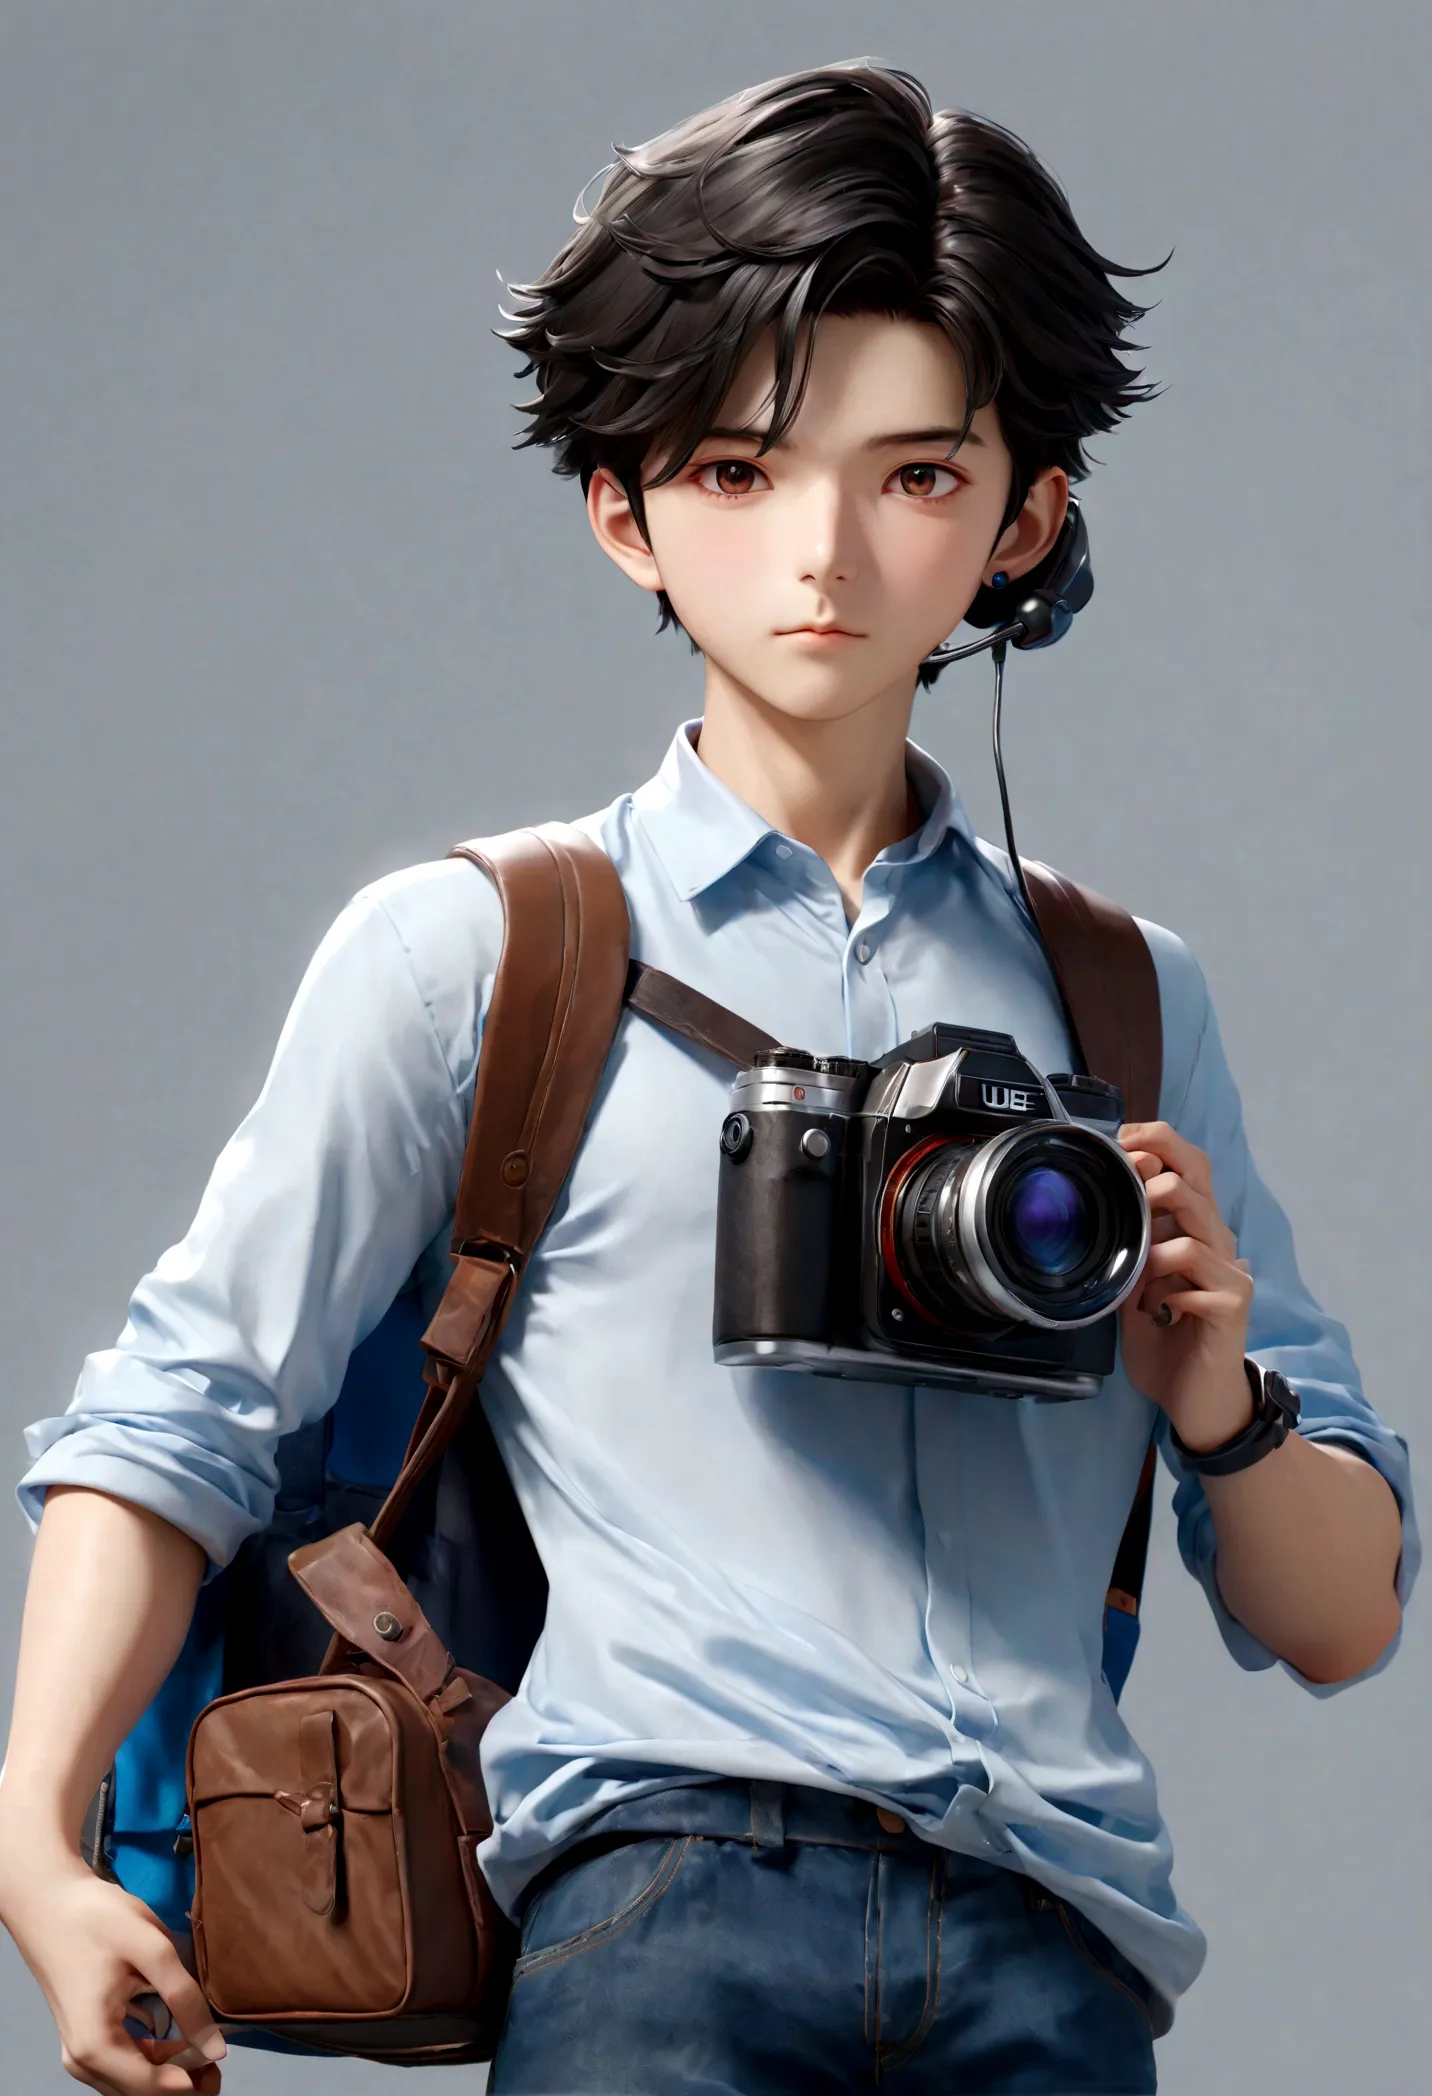 A chinese boy, With a headset, Wearing a shirt, camera, Carrying a camera backpack, full-body shot, 85mm lens, Ultra-high-defini...